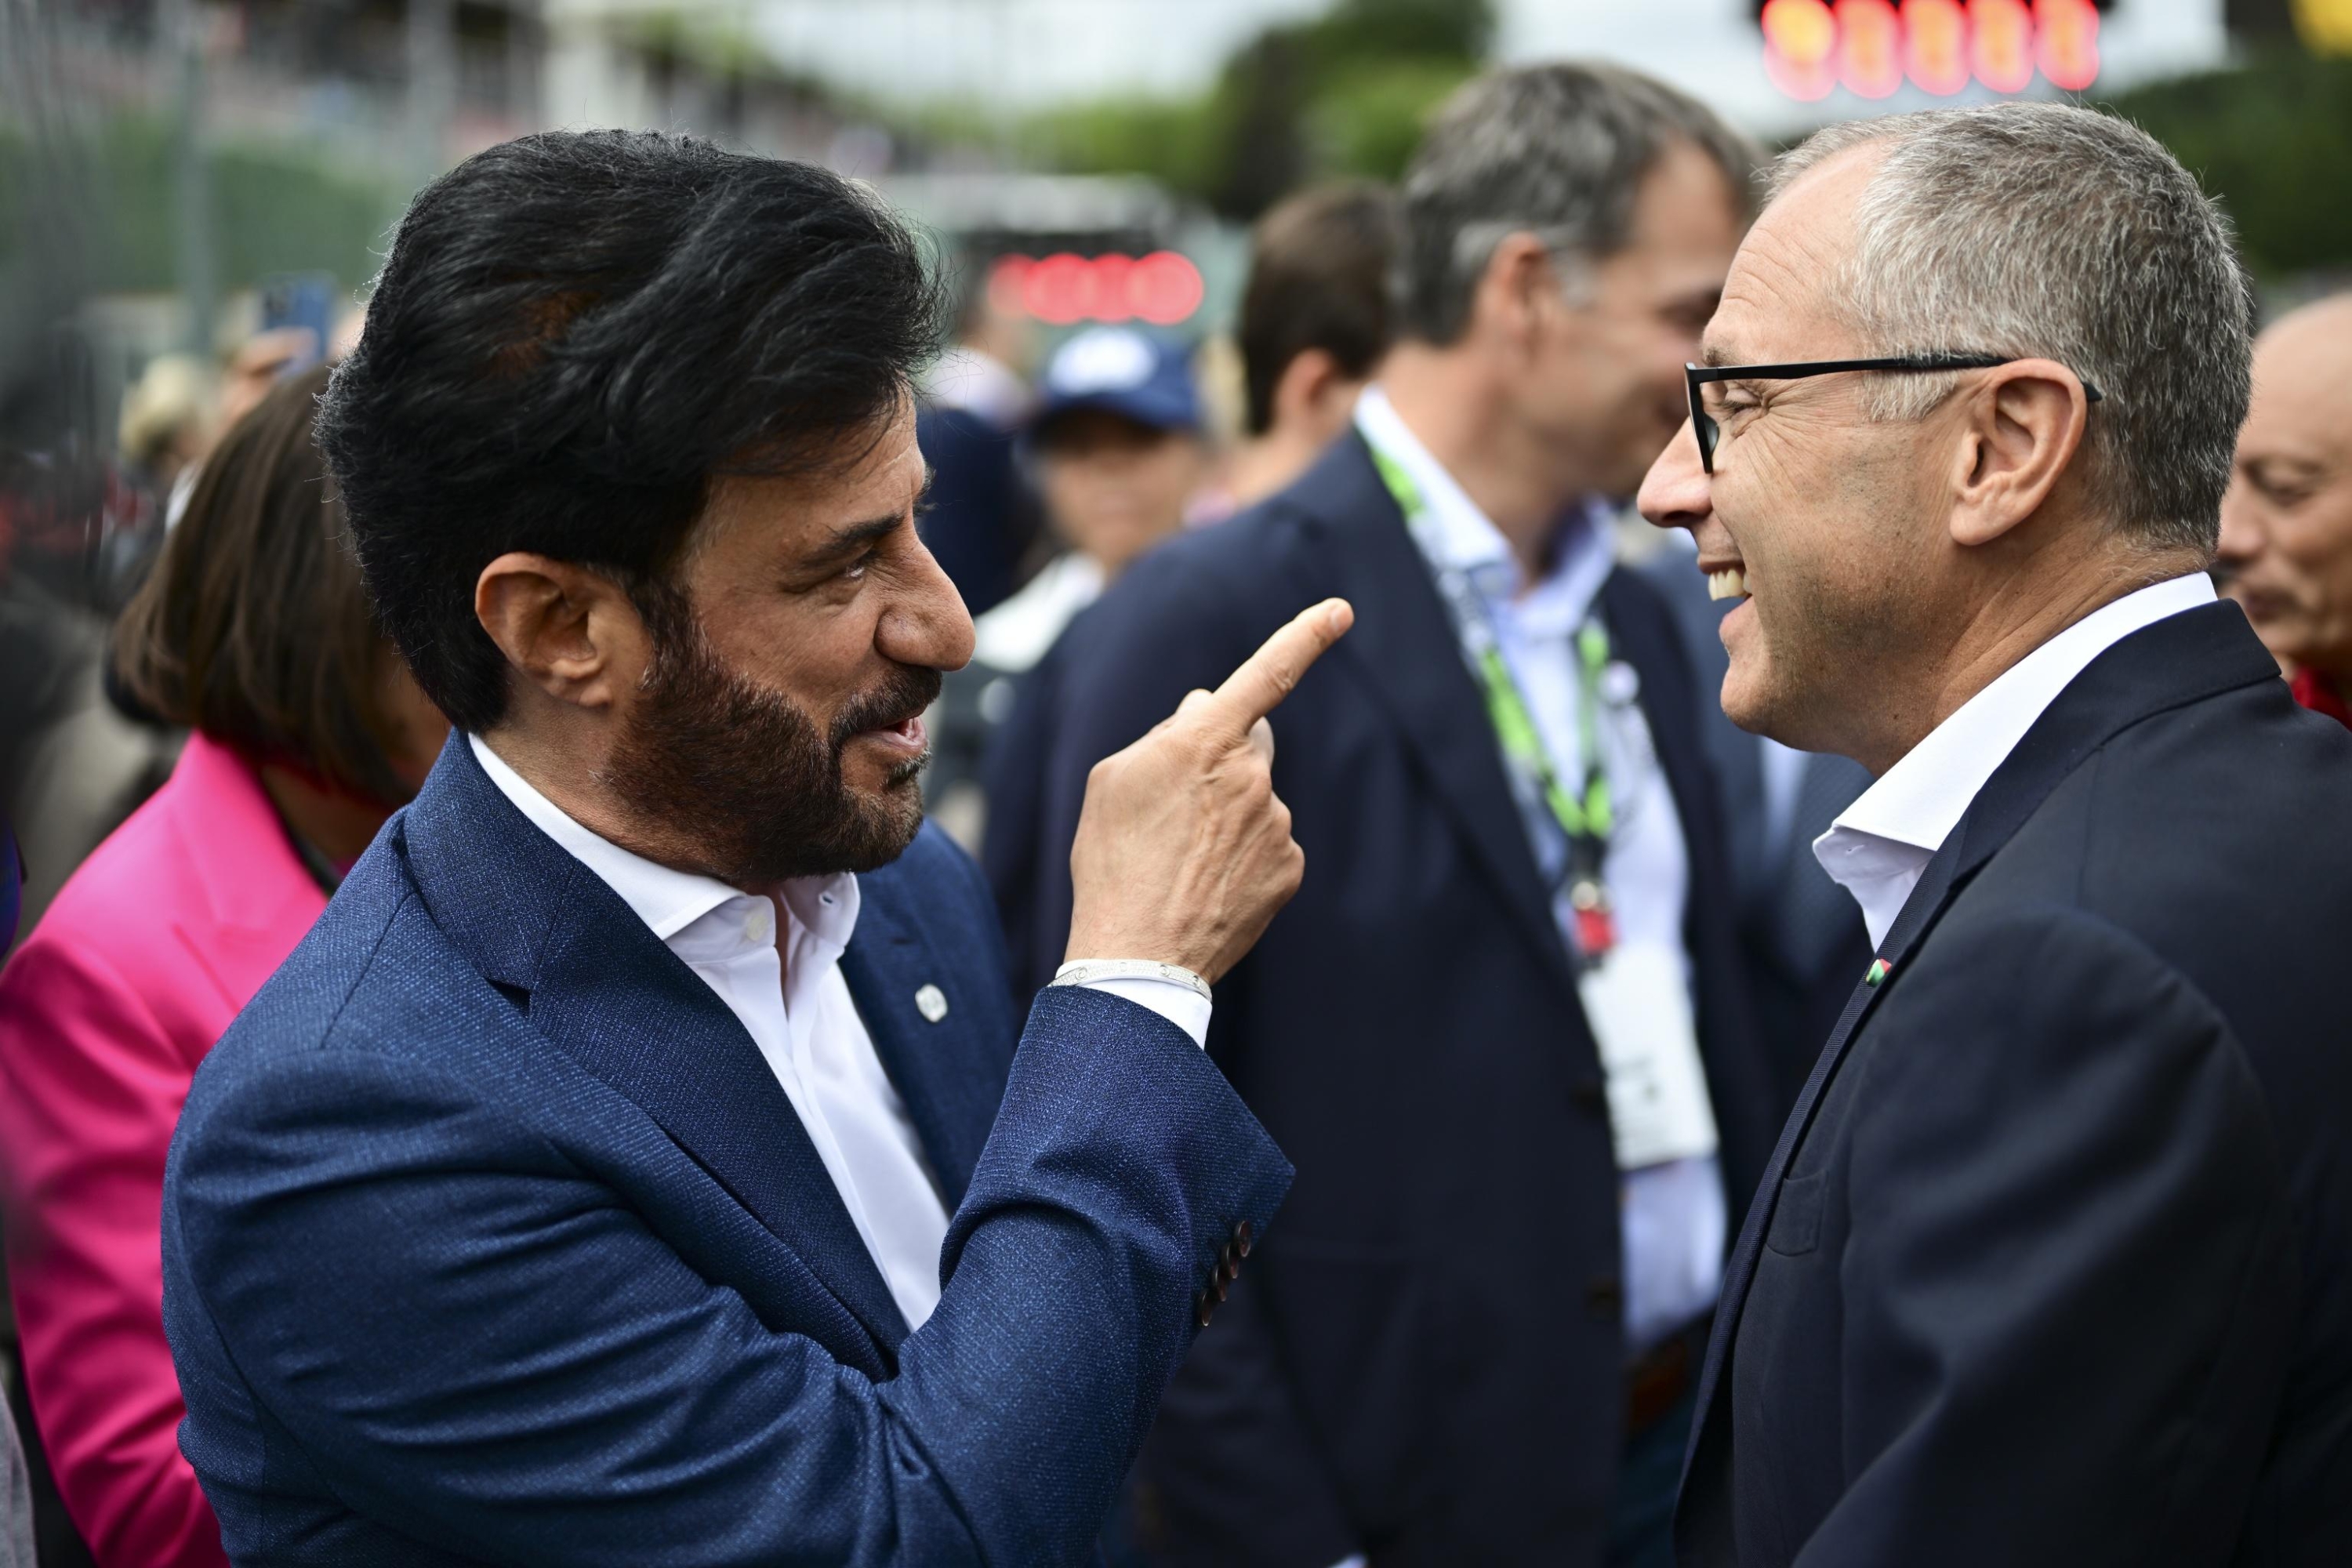 epa10777172 Emirati Mohammed Bin Sulayem (L), President of FIA, and Stefano Domenicali (R), CEO of Formula One Group react prior to the 2023 Formula 1 Belgian Grand Prix at the Circuit de Spa-Francorchamps racetrack in Stavelot, Belgium, 30 July 2023.  EPA/CHRISTIAN BRUNA